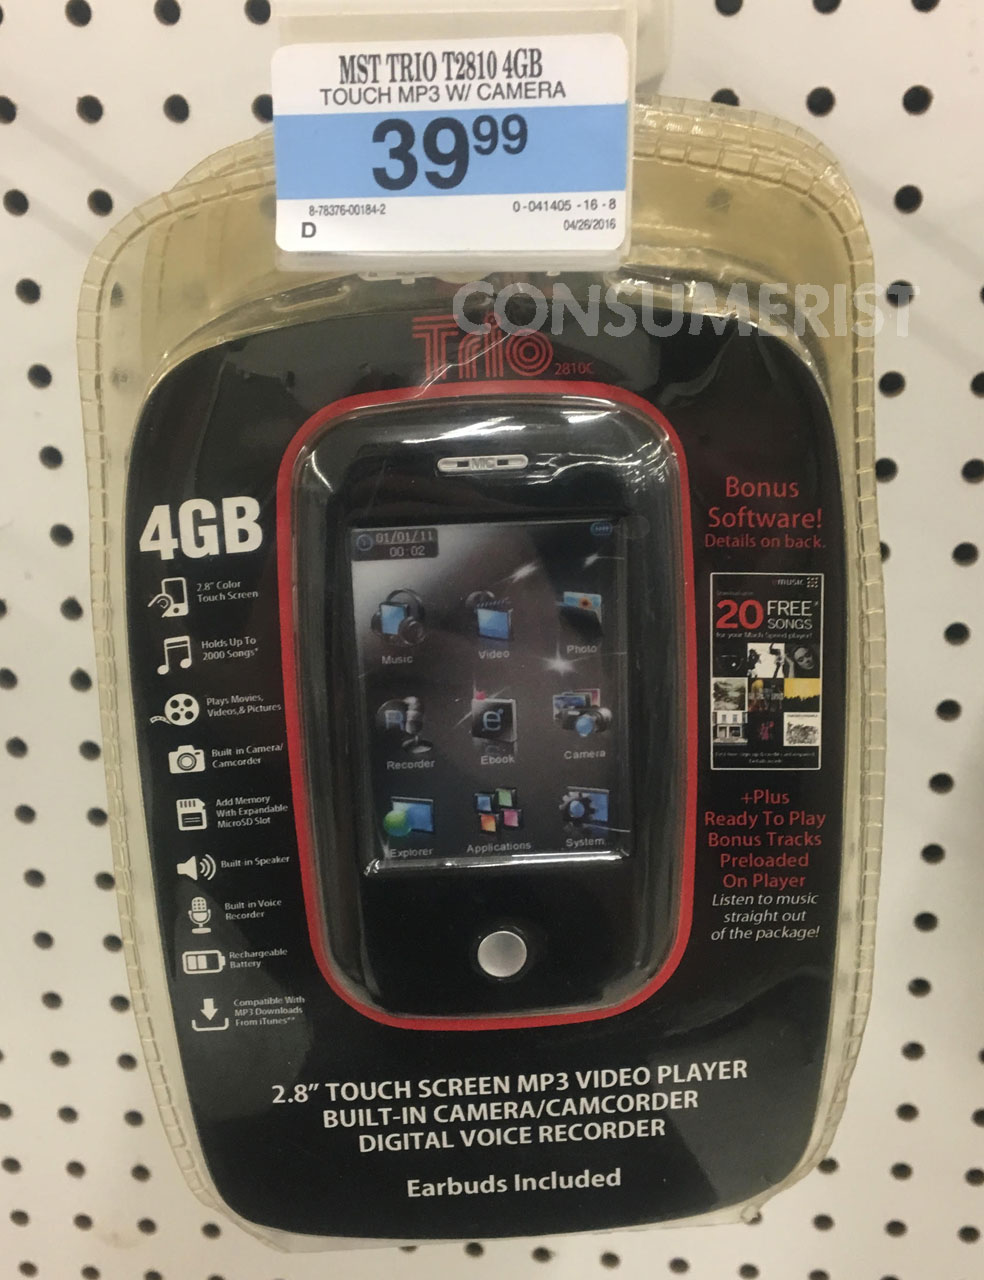 Raiders Of The Lost Walmart Find MP3 Player That Users Hated Back In 2012